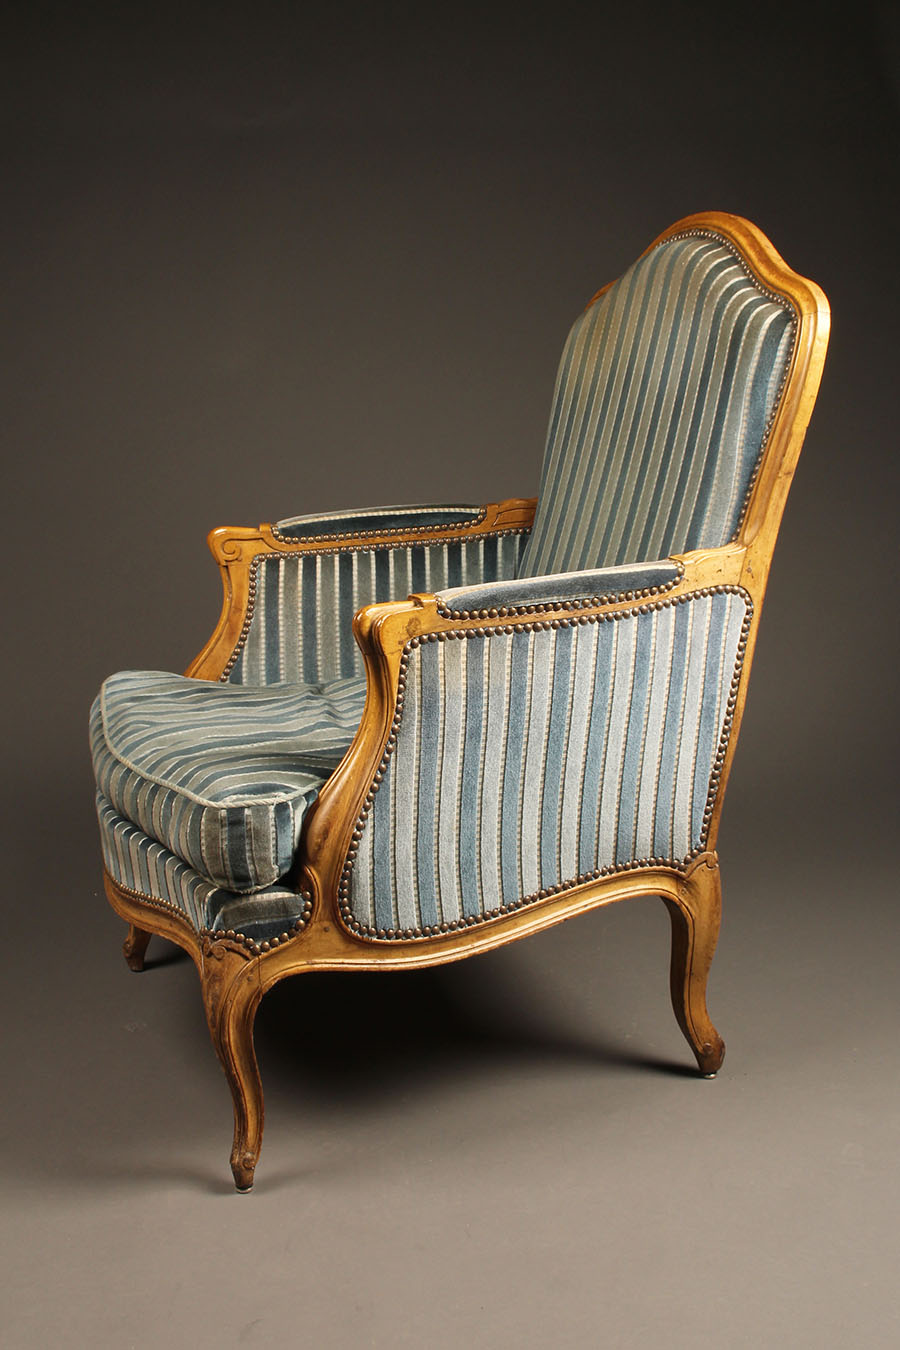 Pair of french louis xv style wooden yellow striped upholstered armchairs